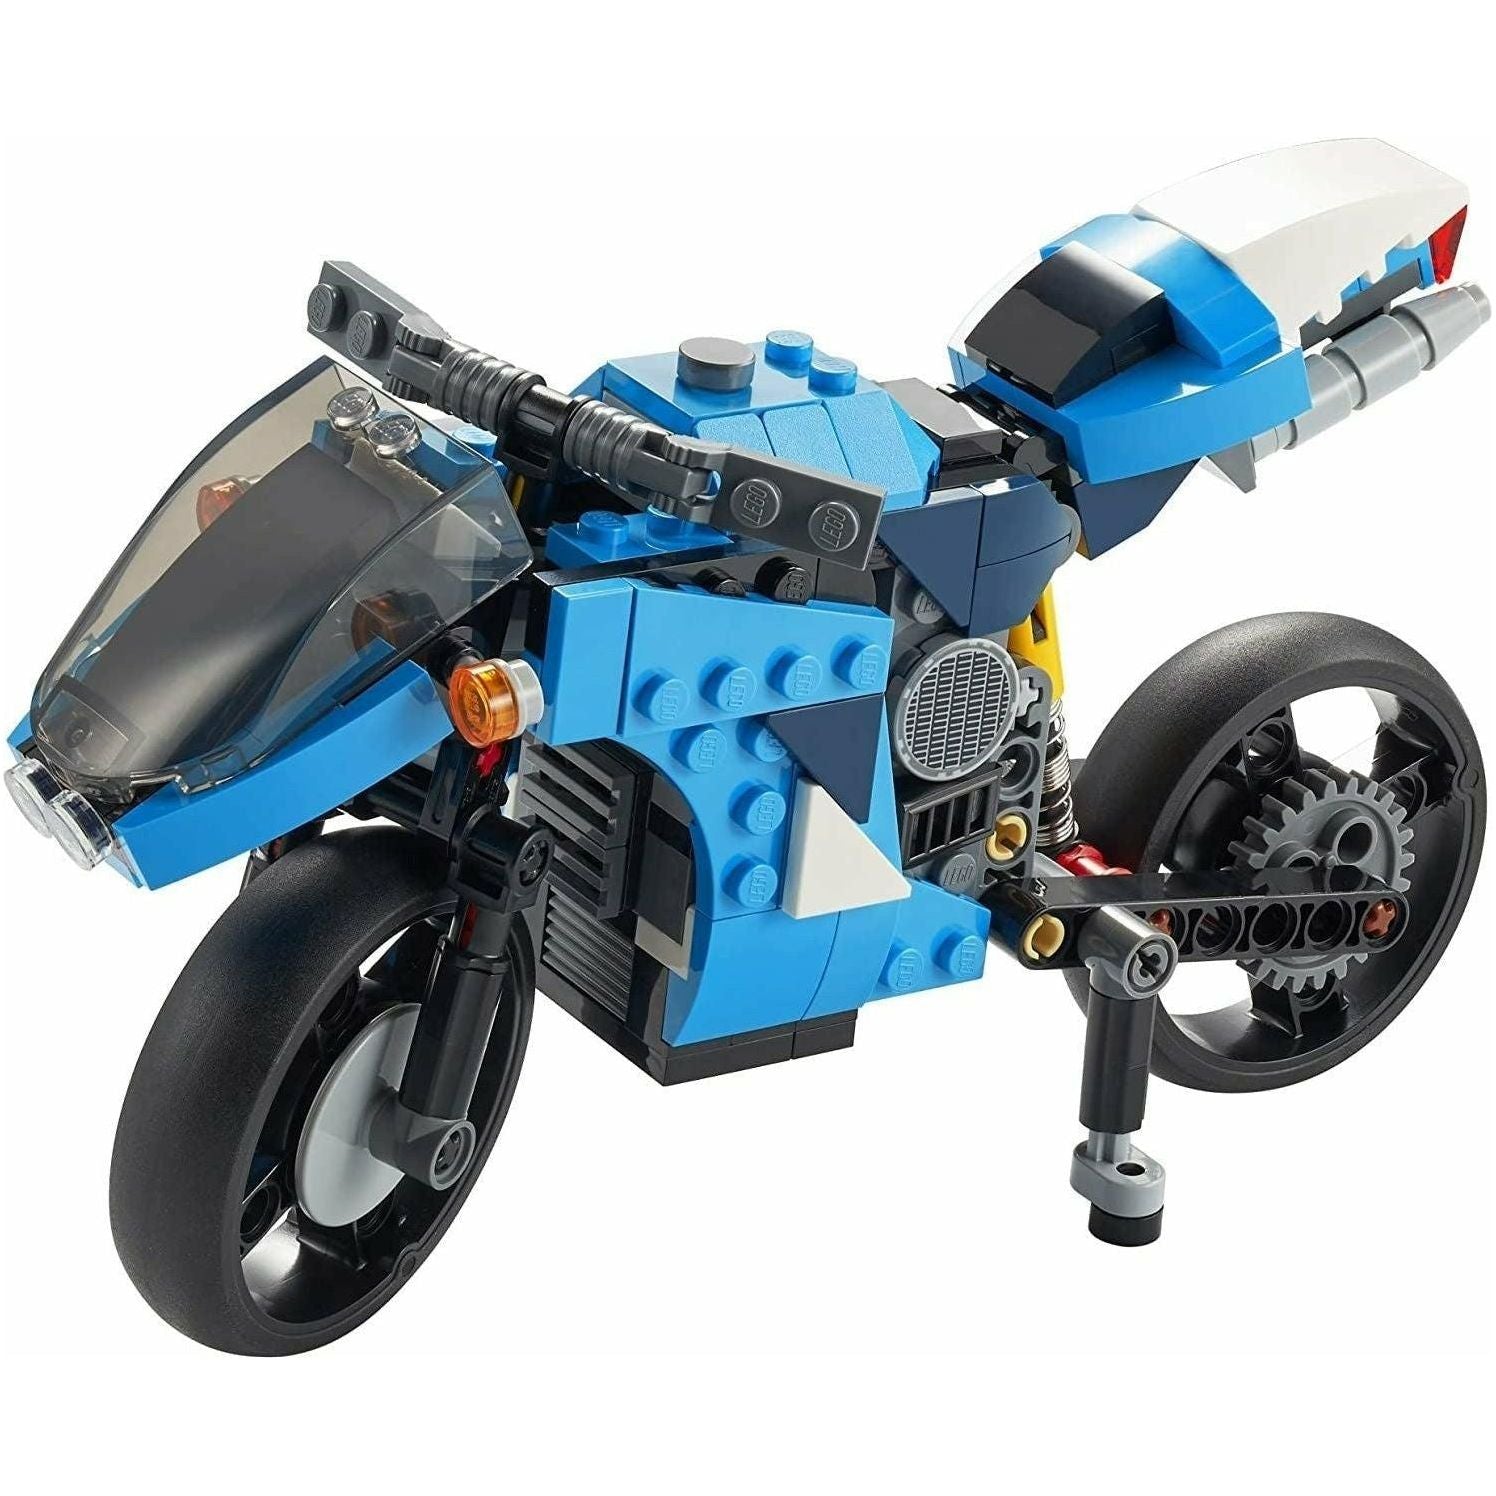 LEGO Creator 3in1 Superbike 31114 Toy Motorcycle Building 236 Pieces - BumbleToys - 8+ Years, Boys, Creator 3In1, LEGO, OXE, Pre-Order